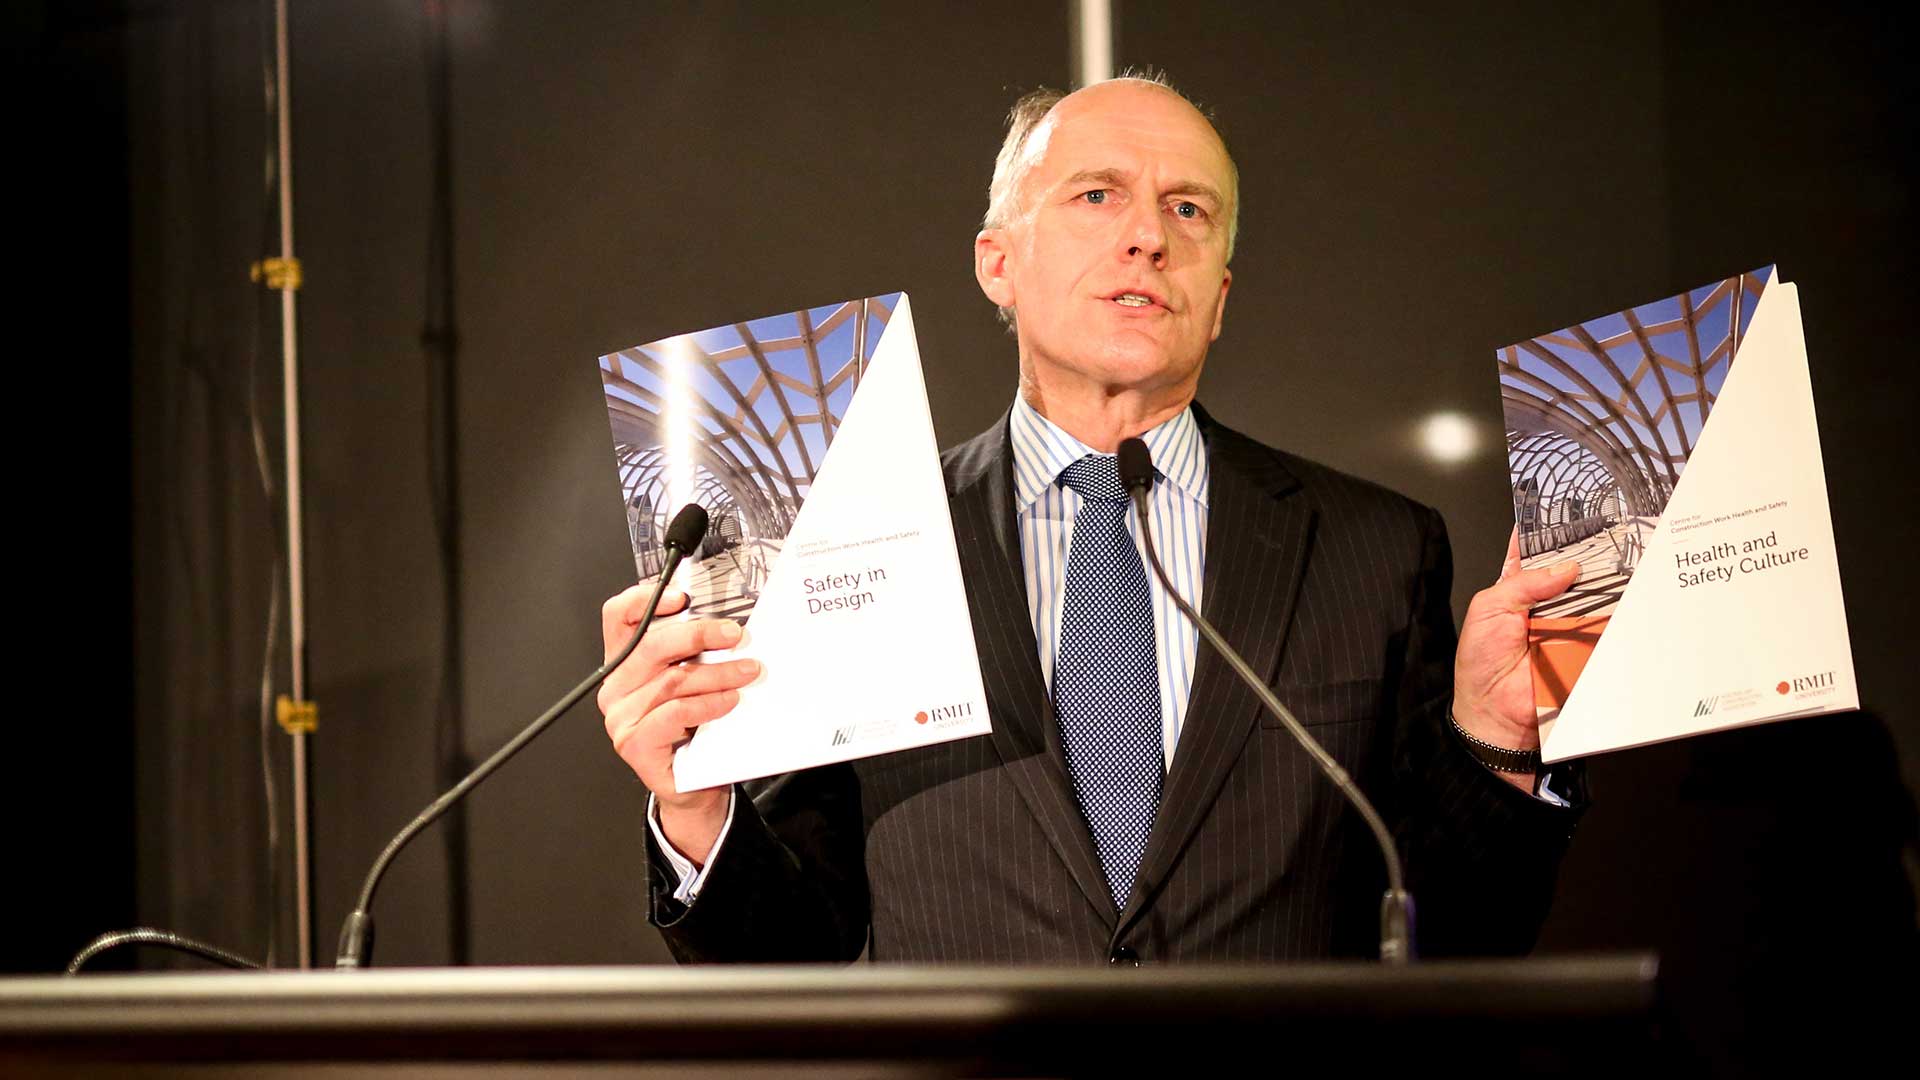 Senator Eric Abetz launches the reports on safety in design and health and safety culture at the ACA event on 7 August 2014